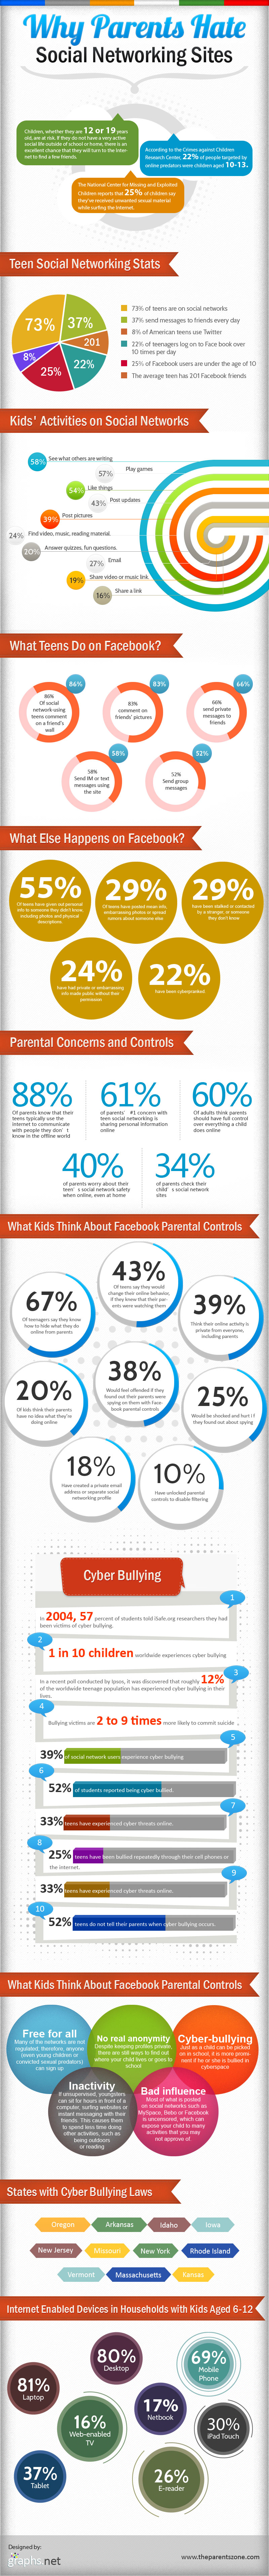 Why-Parents-Hate-Social-Networking-Sites